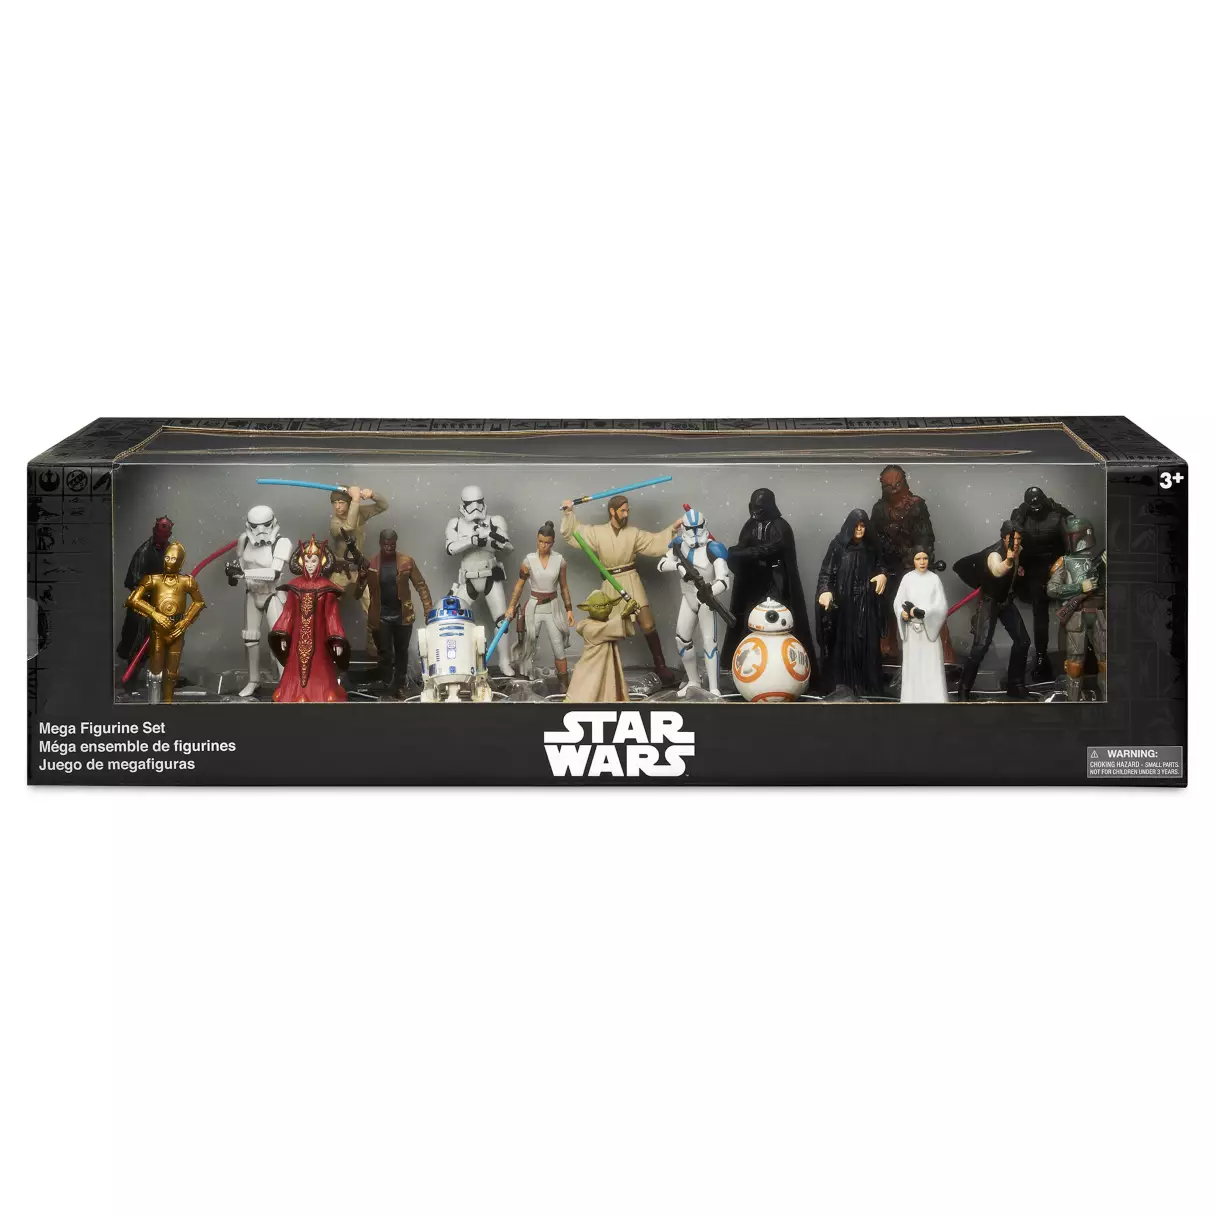 Gifts For Star Wars Fans - The Disney Game Plan